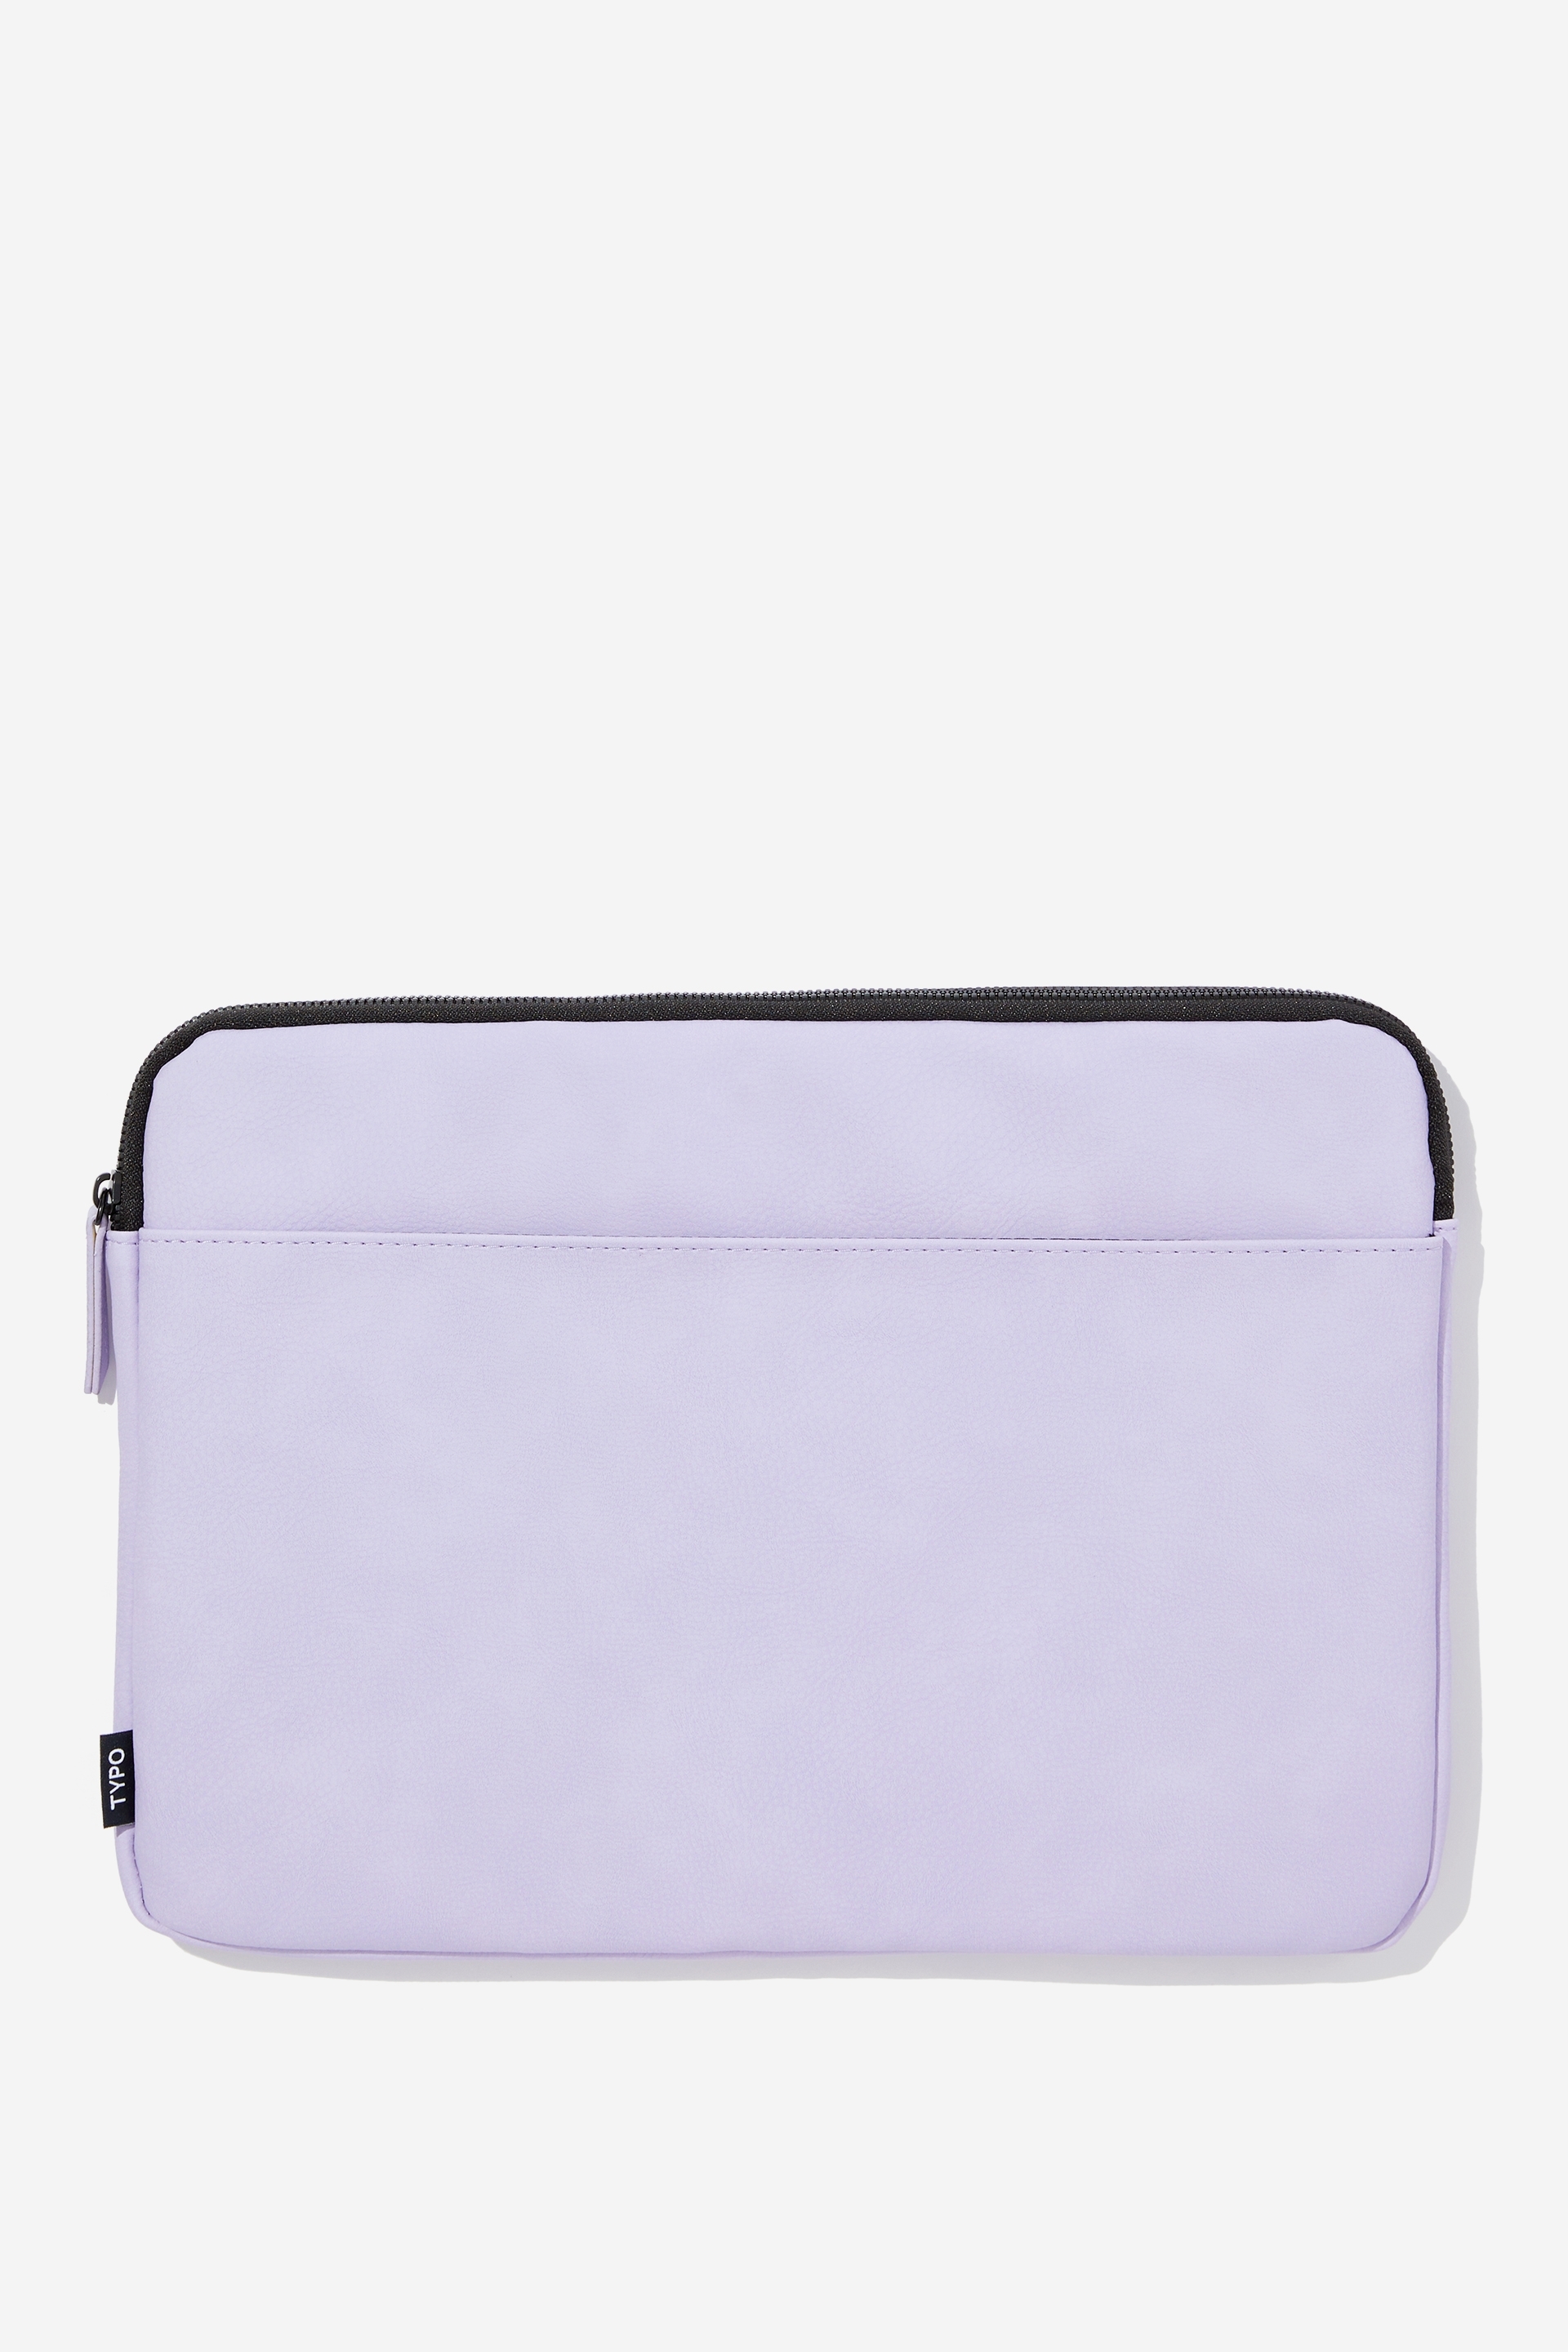 Typo - Core Laptop Cover 13 Inch - Soft lilac